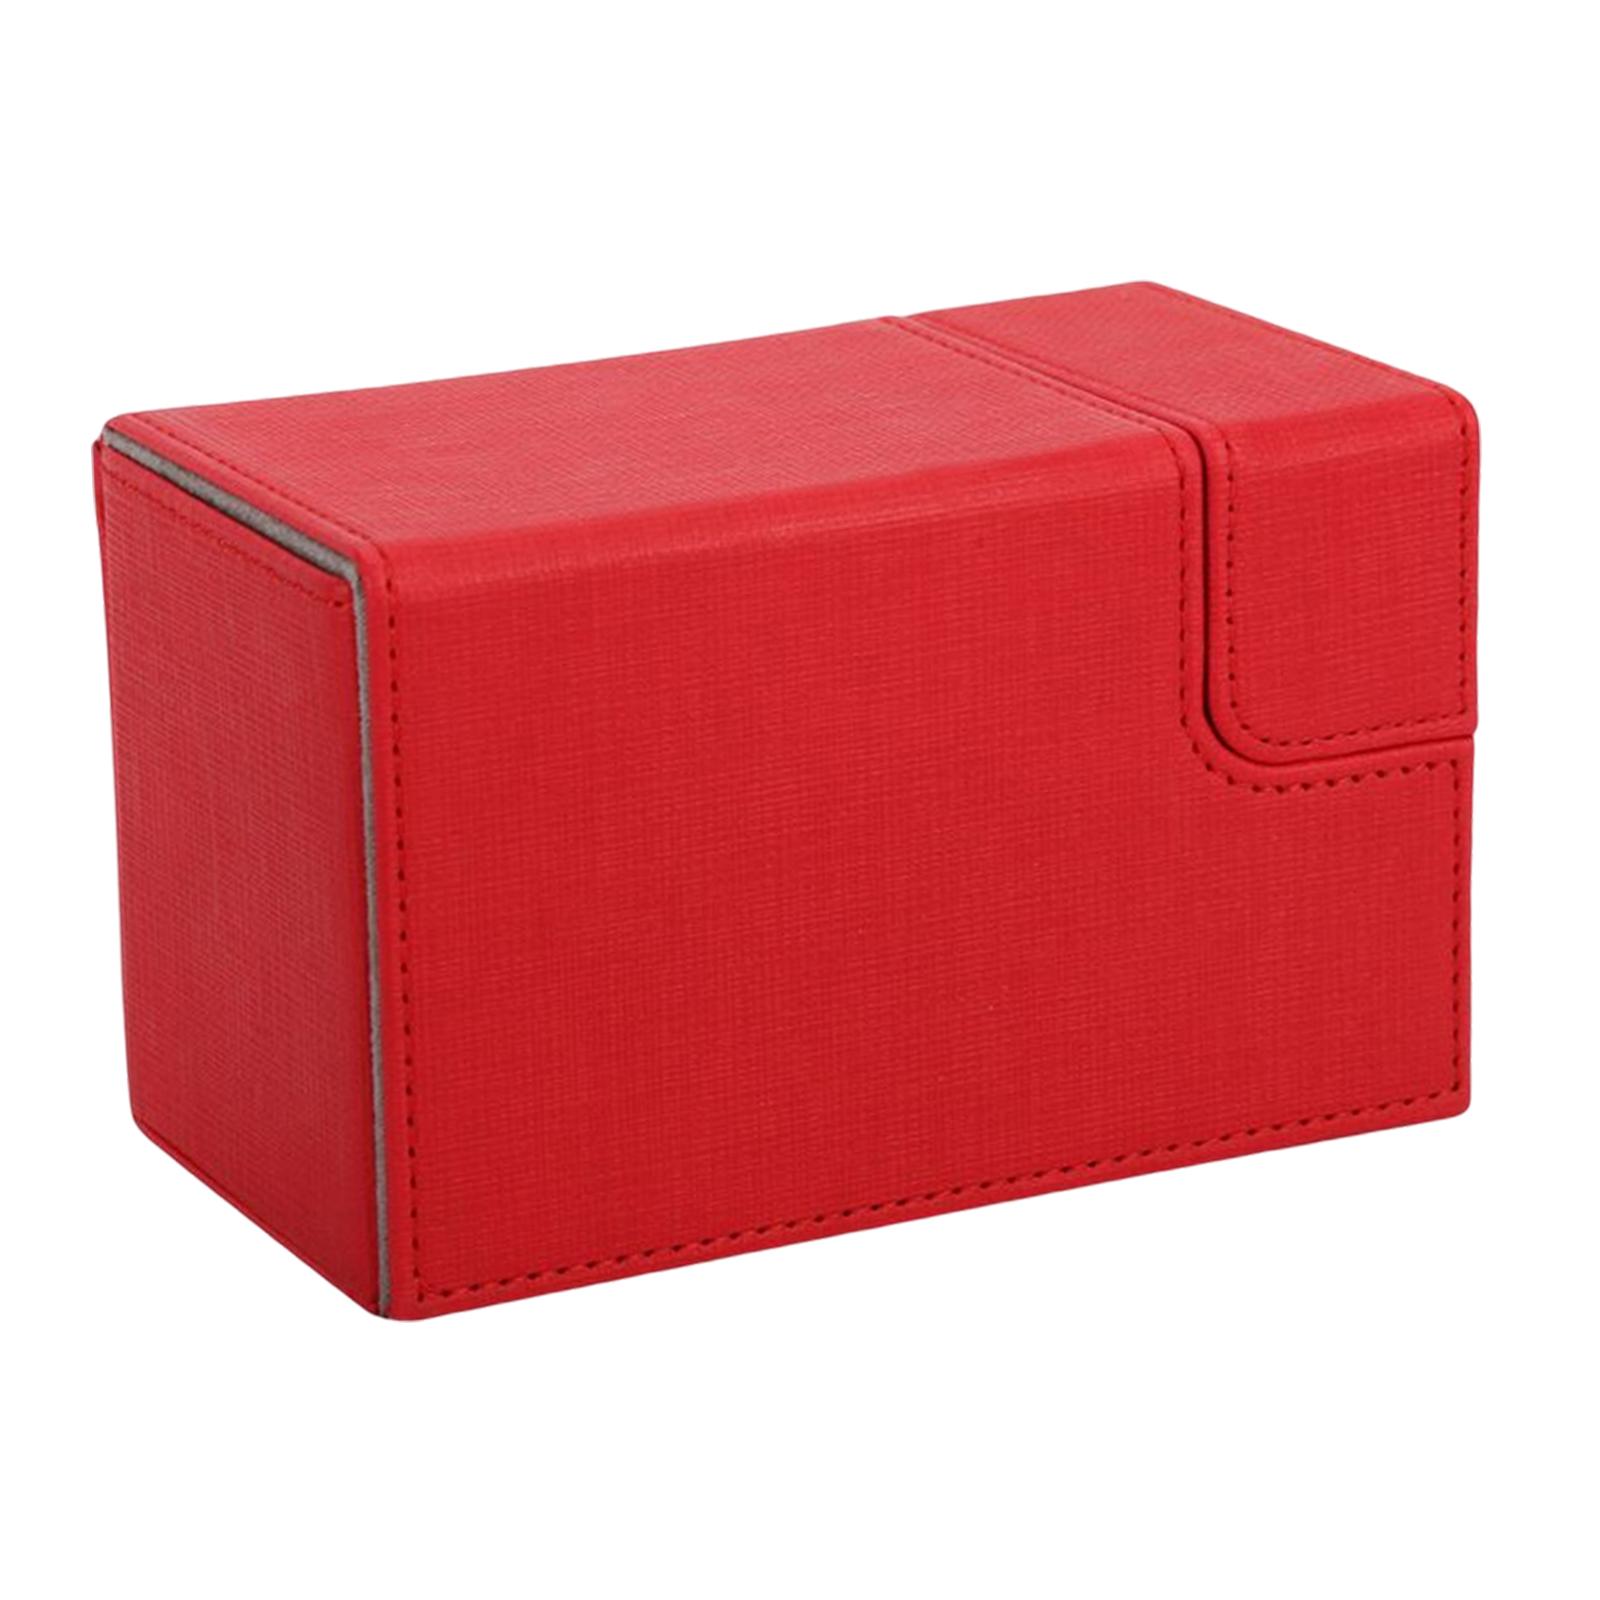 Deck Case Durable Gathering Cards Sturdy Double Drawer card Red 